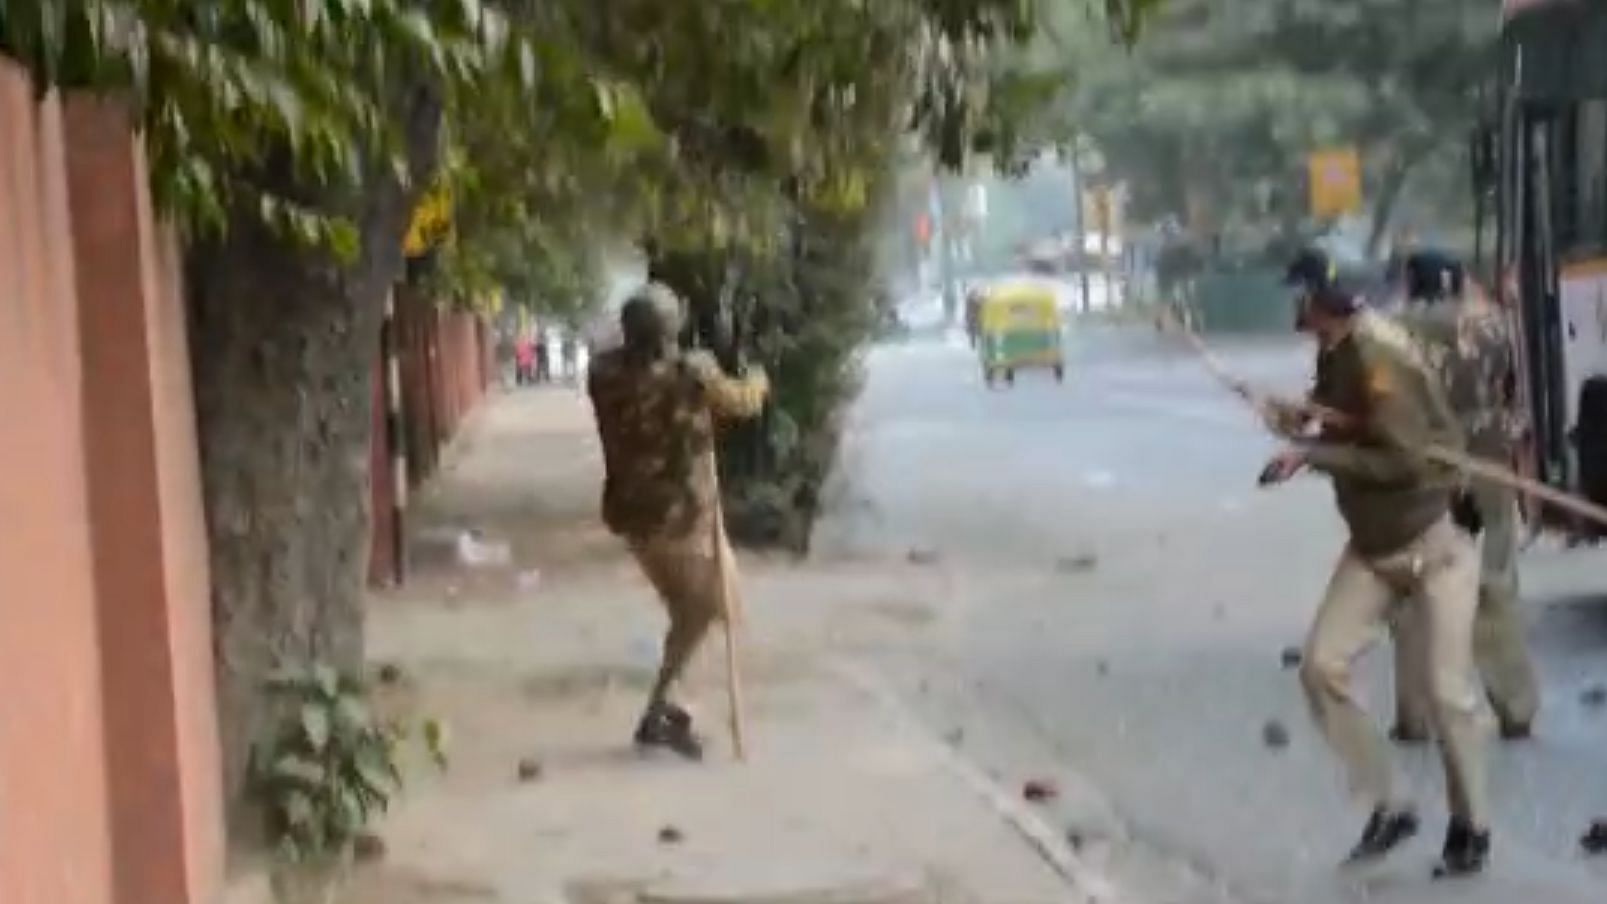 According to an <a href="https://www.ndtv.com/video/news/news/new-videos-suggest-delhi-police-may-have-fired-at-jamia-protesters-535470?video-featured">NDTV</a> report, the video is from Mathura Road near New Friends Colony.